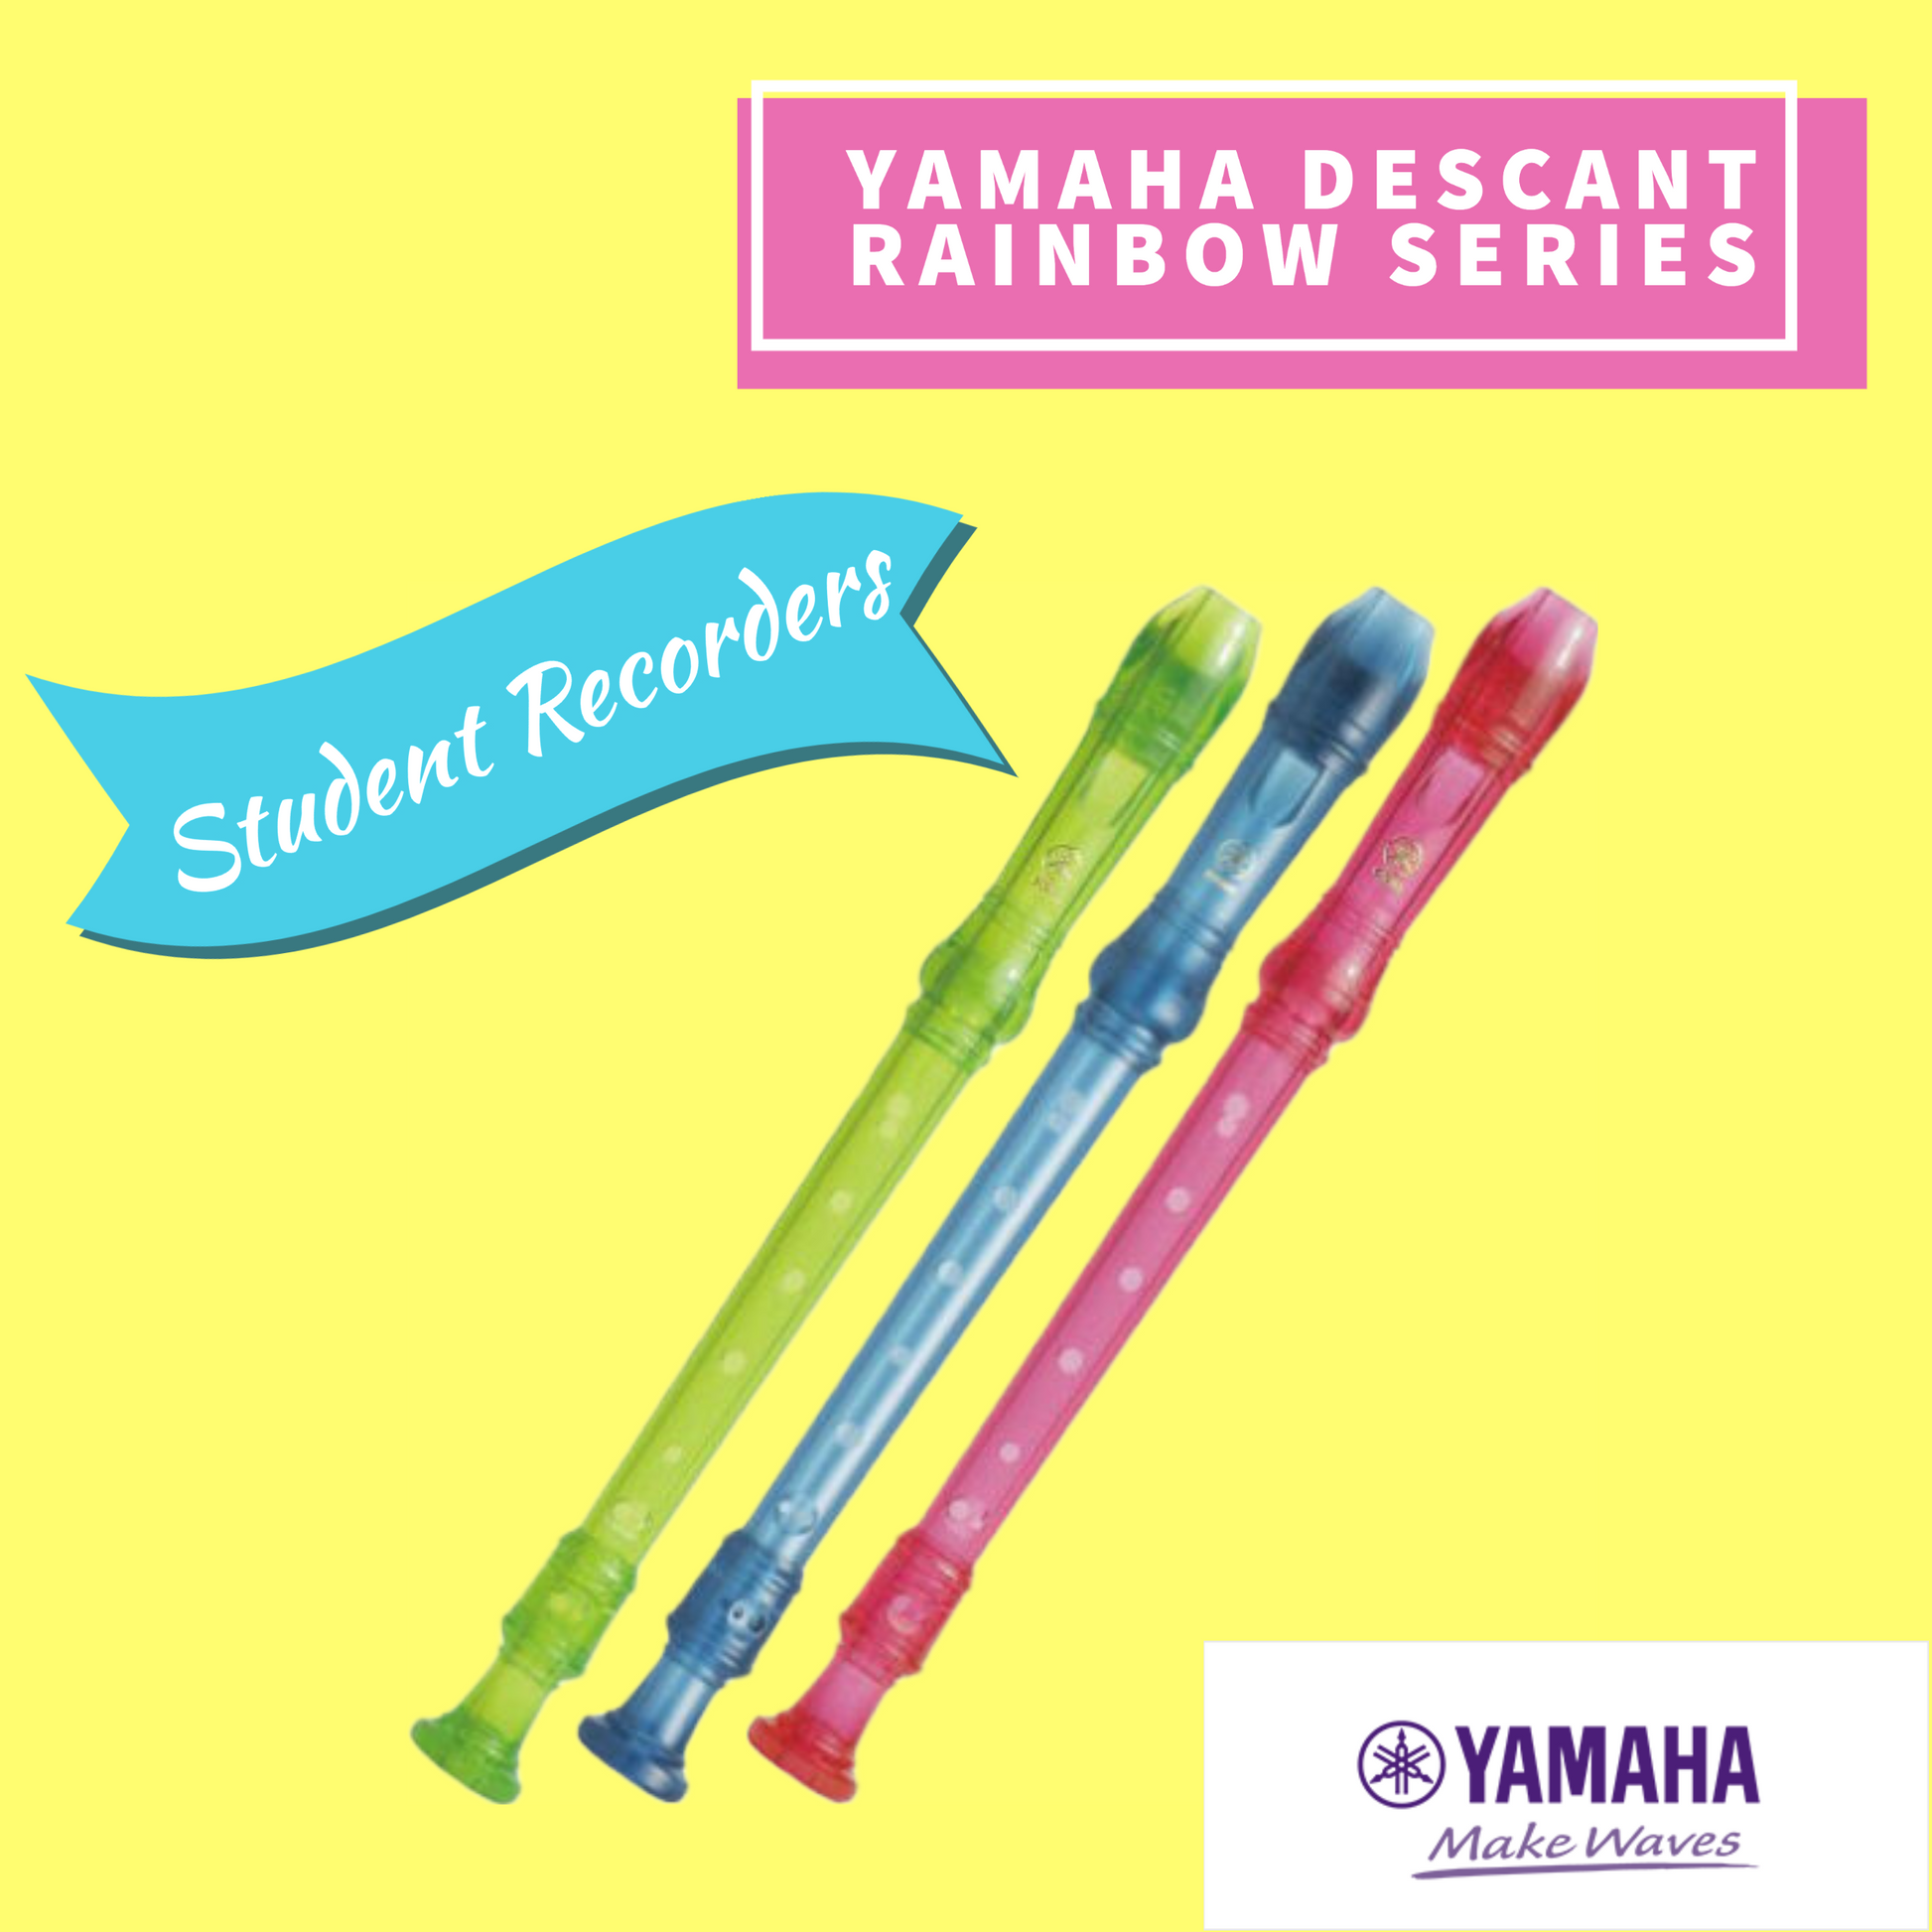 Yamaha Yrs-20Bp Descant C 3 Piece Student Recorder (Candy Pink) Musical Instruments & Accessories